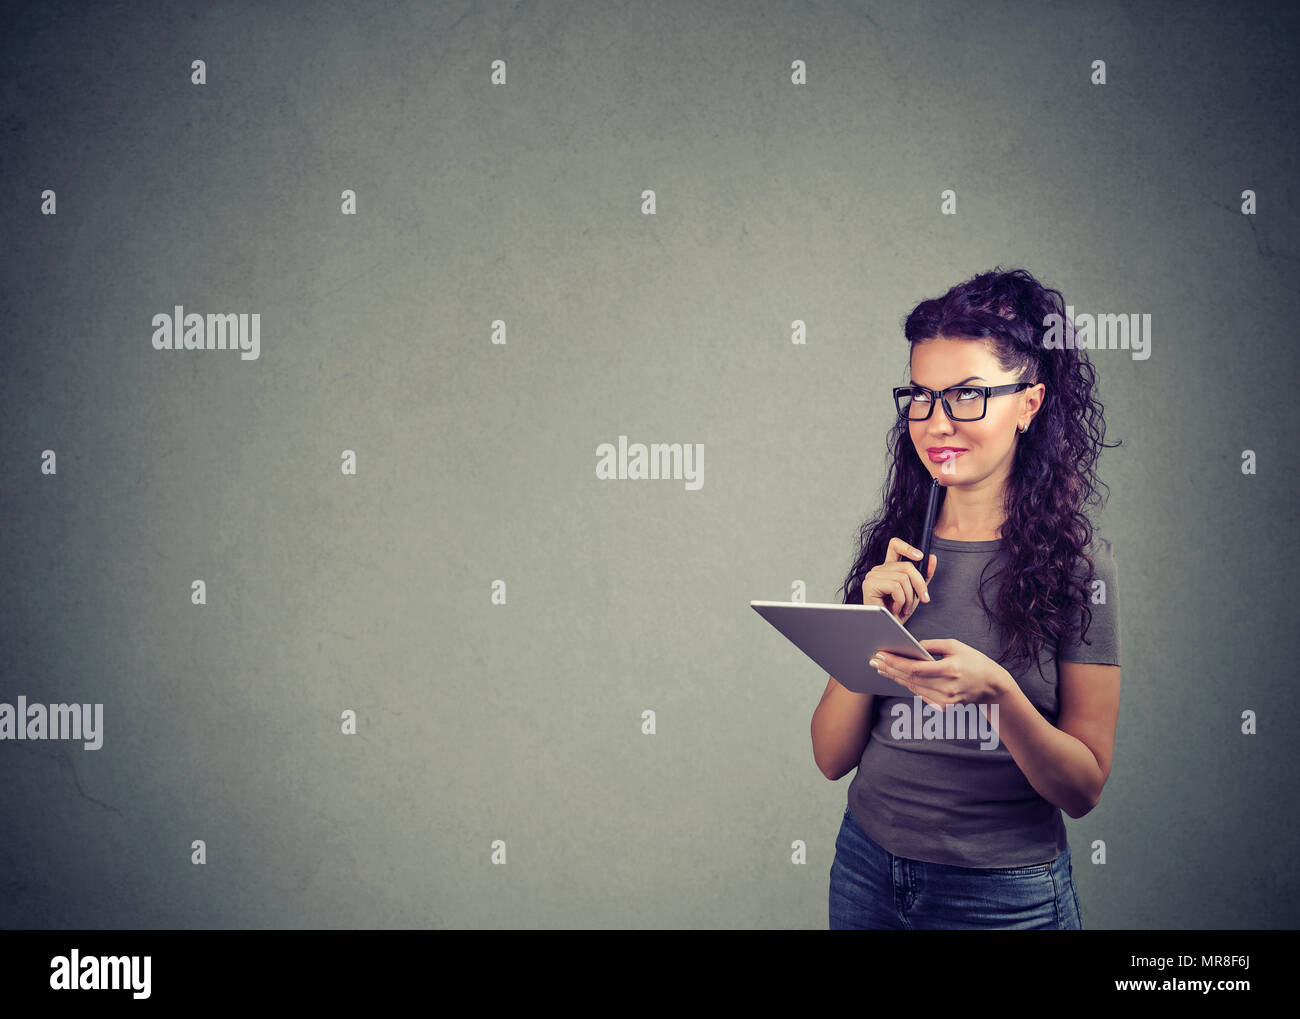 Stylish brunette thinking happily of new ideas while holding pen and using tablet on gray backdrop. Stock Photo